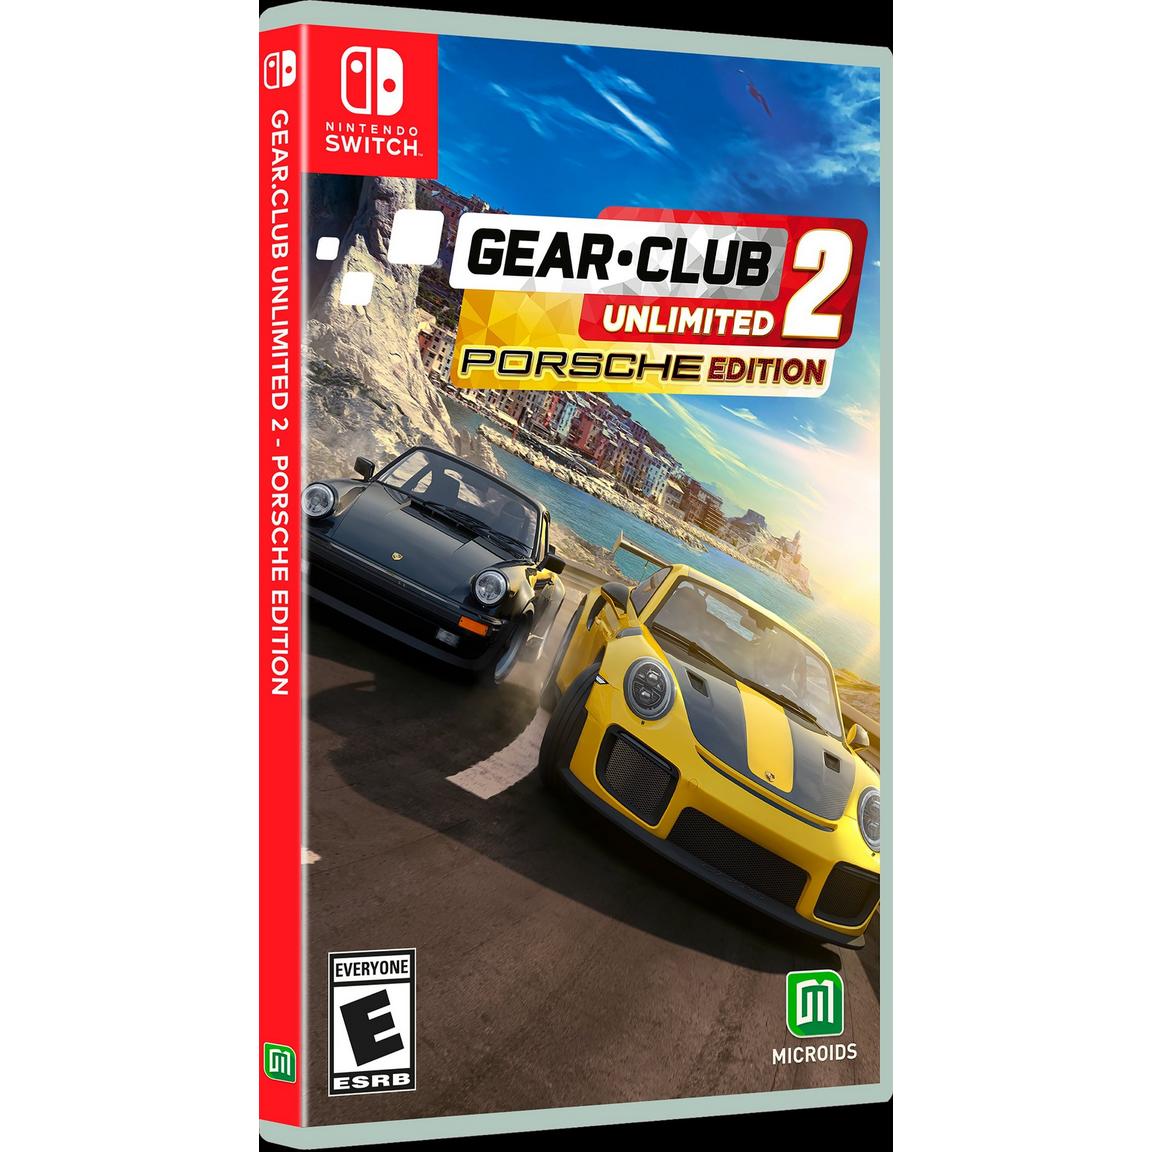 Gear.Club Unlimited 2 Porsche Edition - Nintendo Switch, Pre-Owned